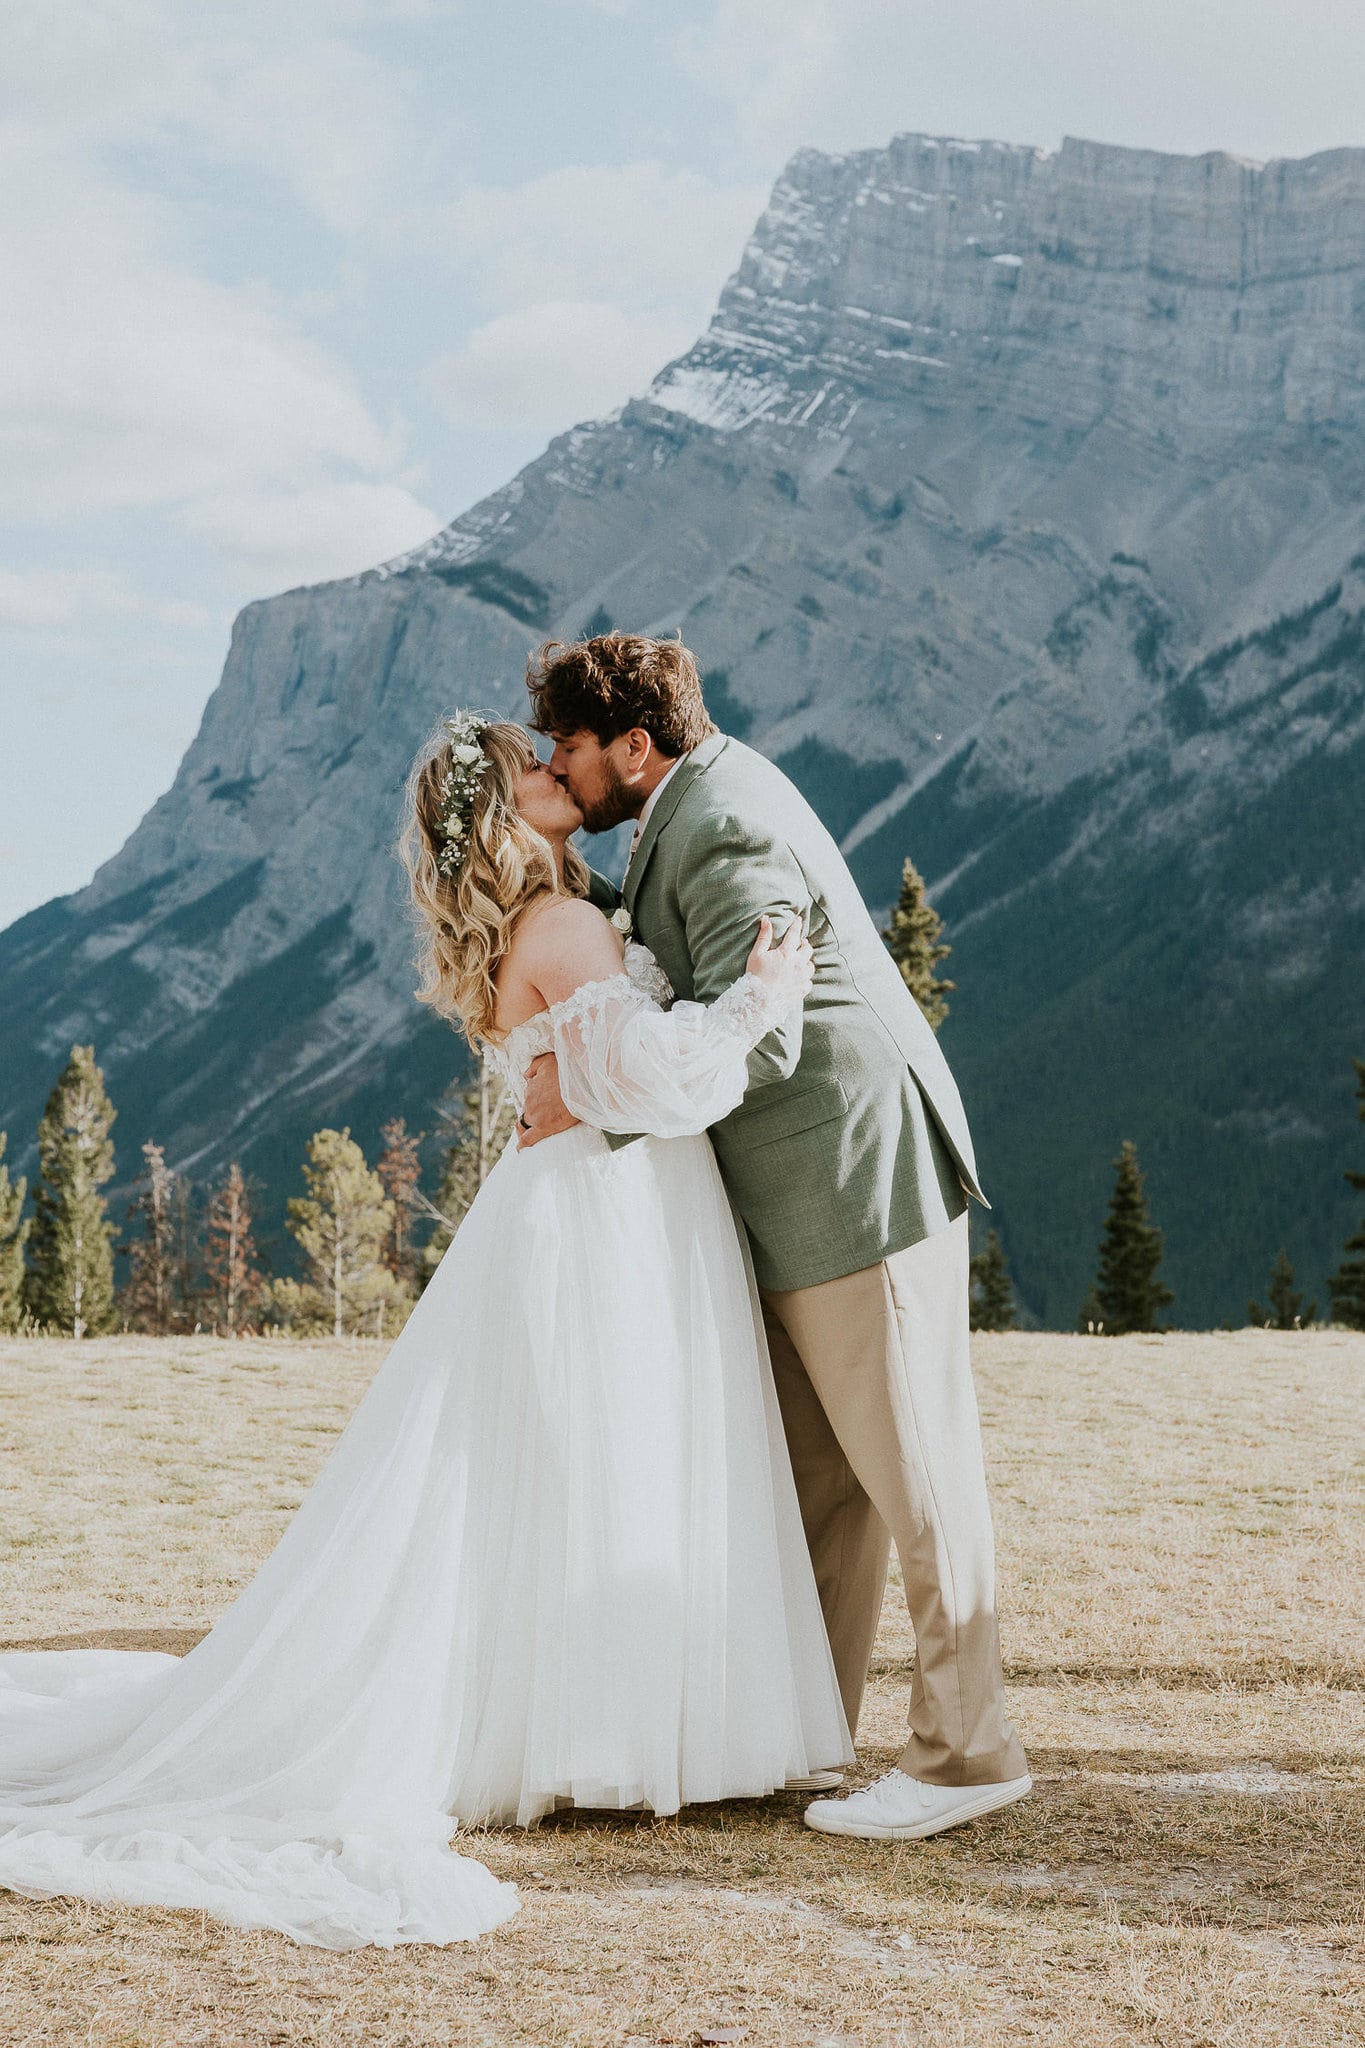 bride and groom do their first kiss at tunnel mountain wedding ceremony in Banff Alberta